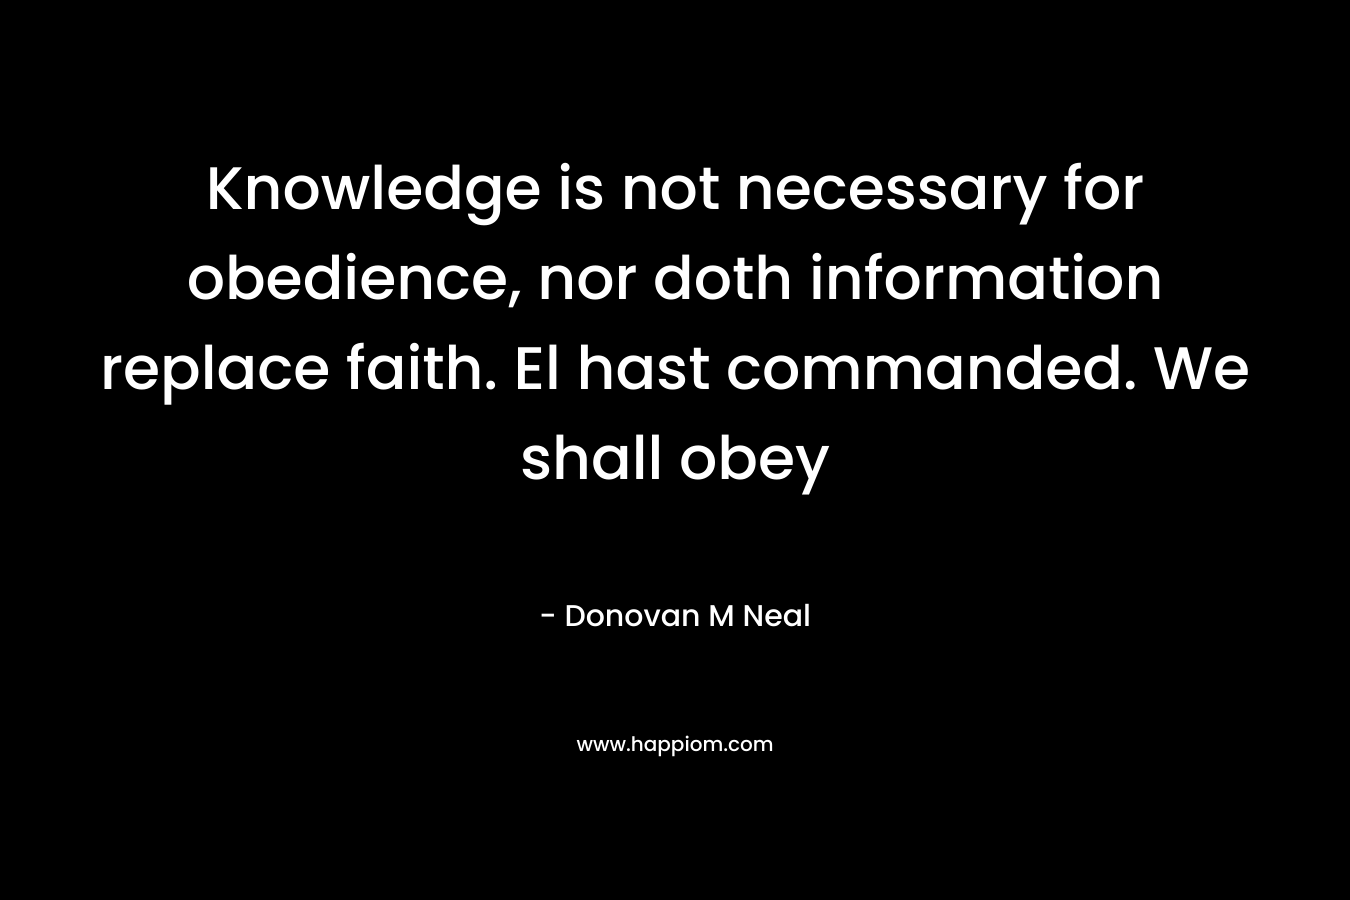 Knowledge is not necessary for obedience, nor doth information replace faith. El hast commanded. We shall obey